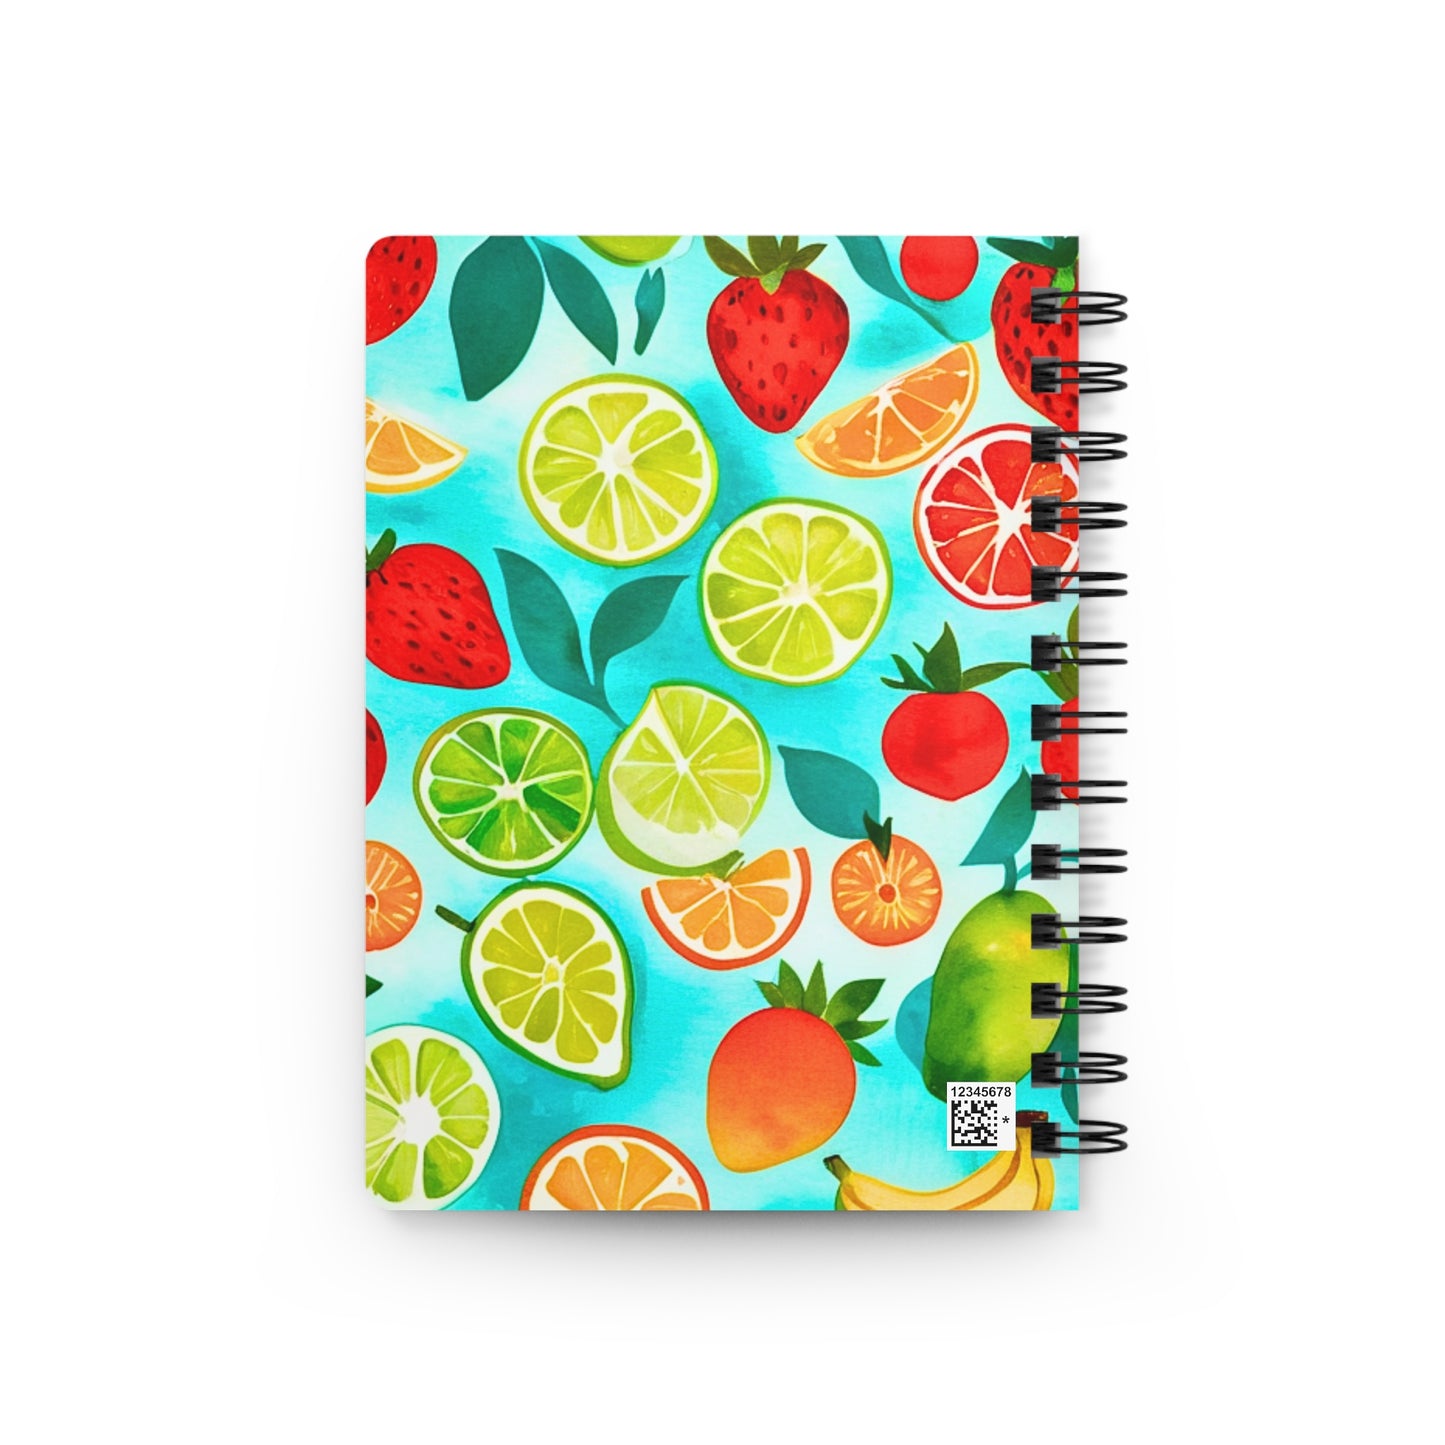 Summer Recipes Planner Watercolor Strawberries Limes Oranges Turquoise Midcentury Modern Writing Spiral Bound Journal